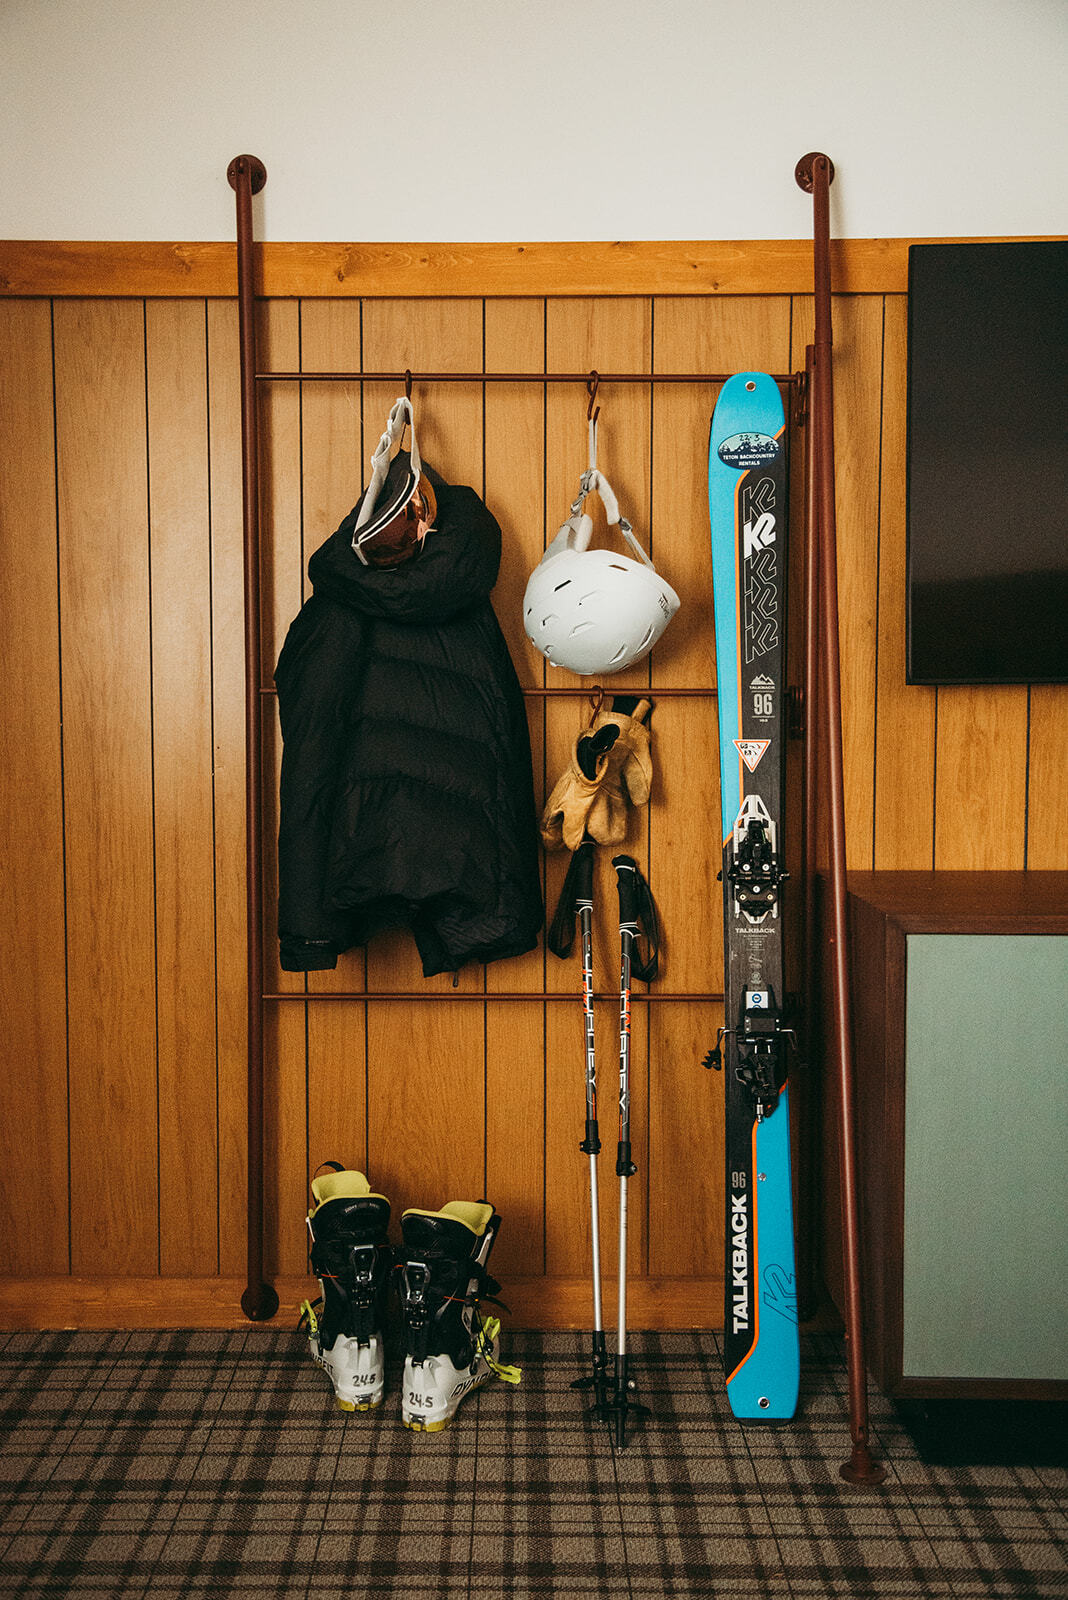 Organized display of winter gear, including snow diving clothes, snowboard, and snowshoes neatly hung.